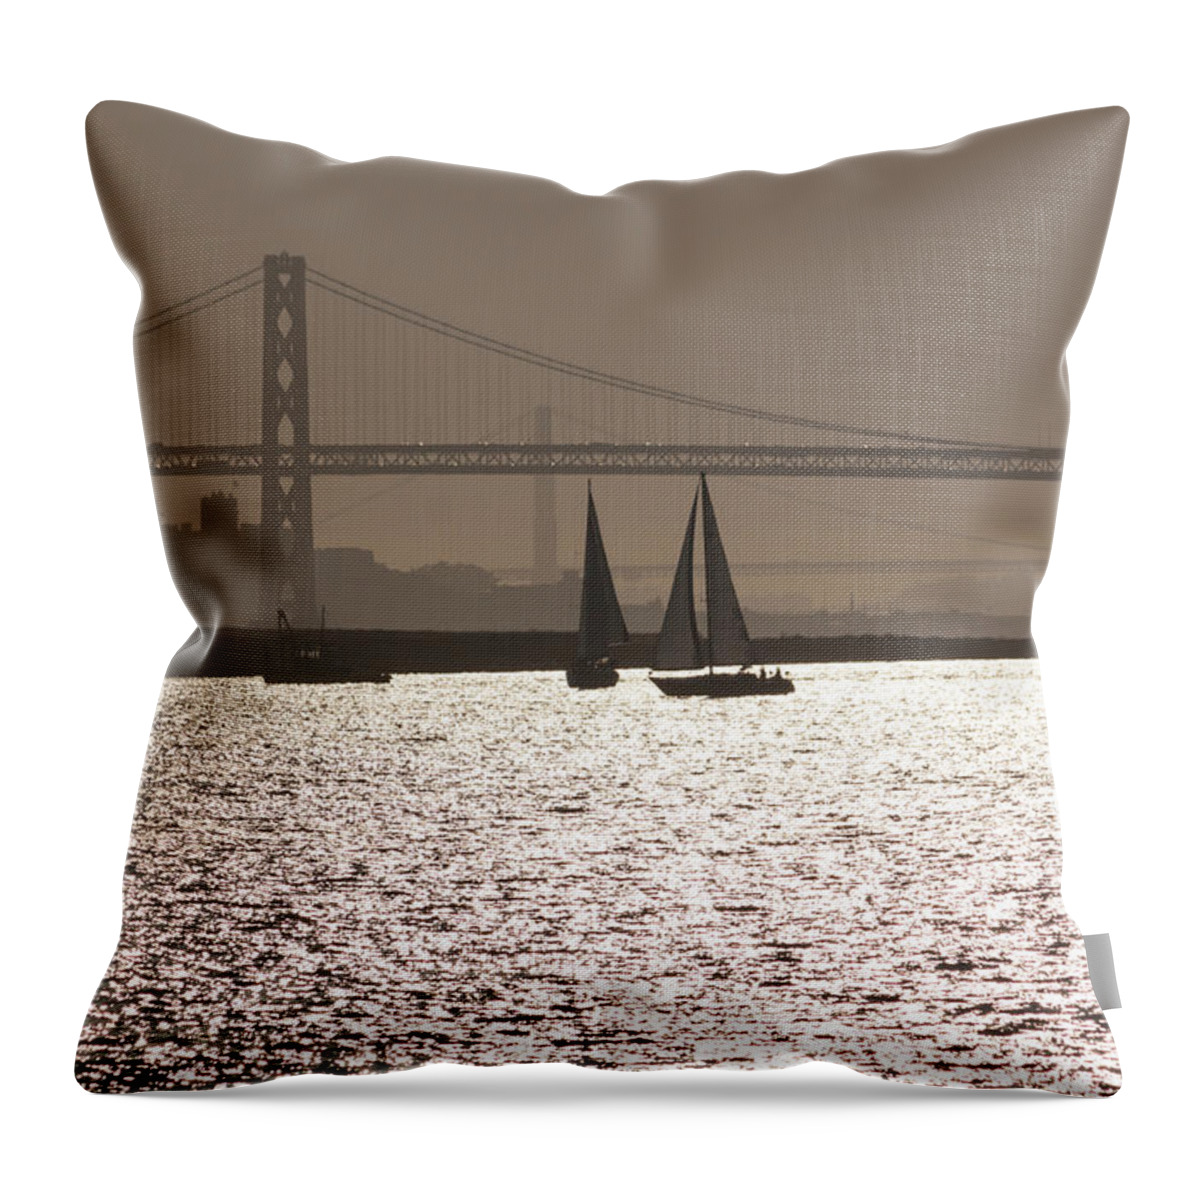 Photograph Throw Pillow featuring the photograph Oakland Bay Bridge III by Suzanne Gaff